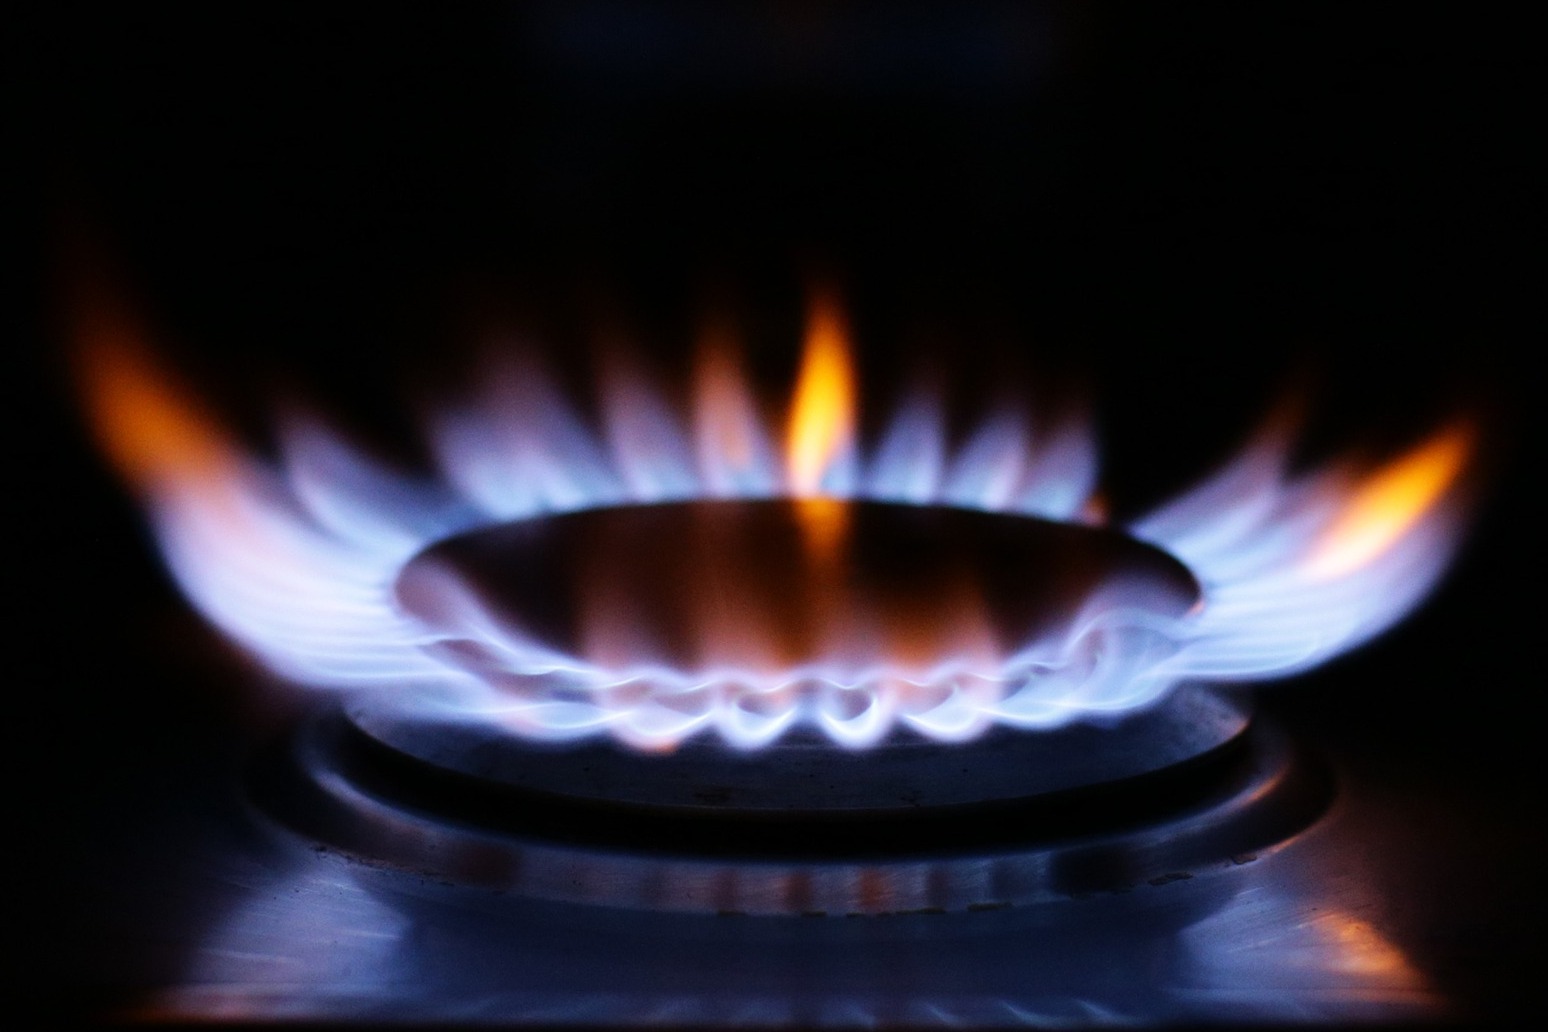 Ofgem confirms average household energy bills to rise by £94 a year from January 